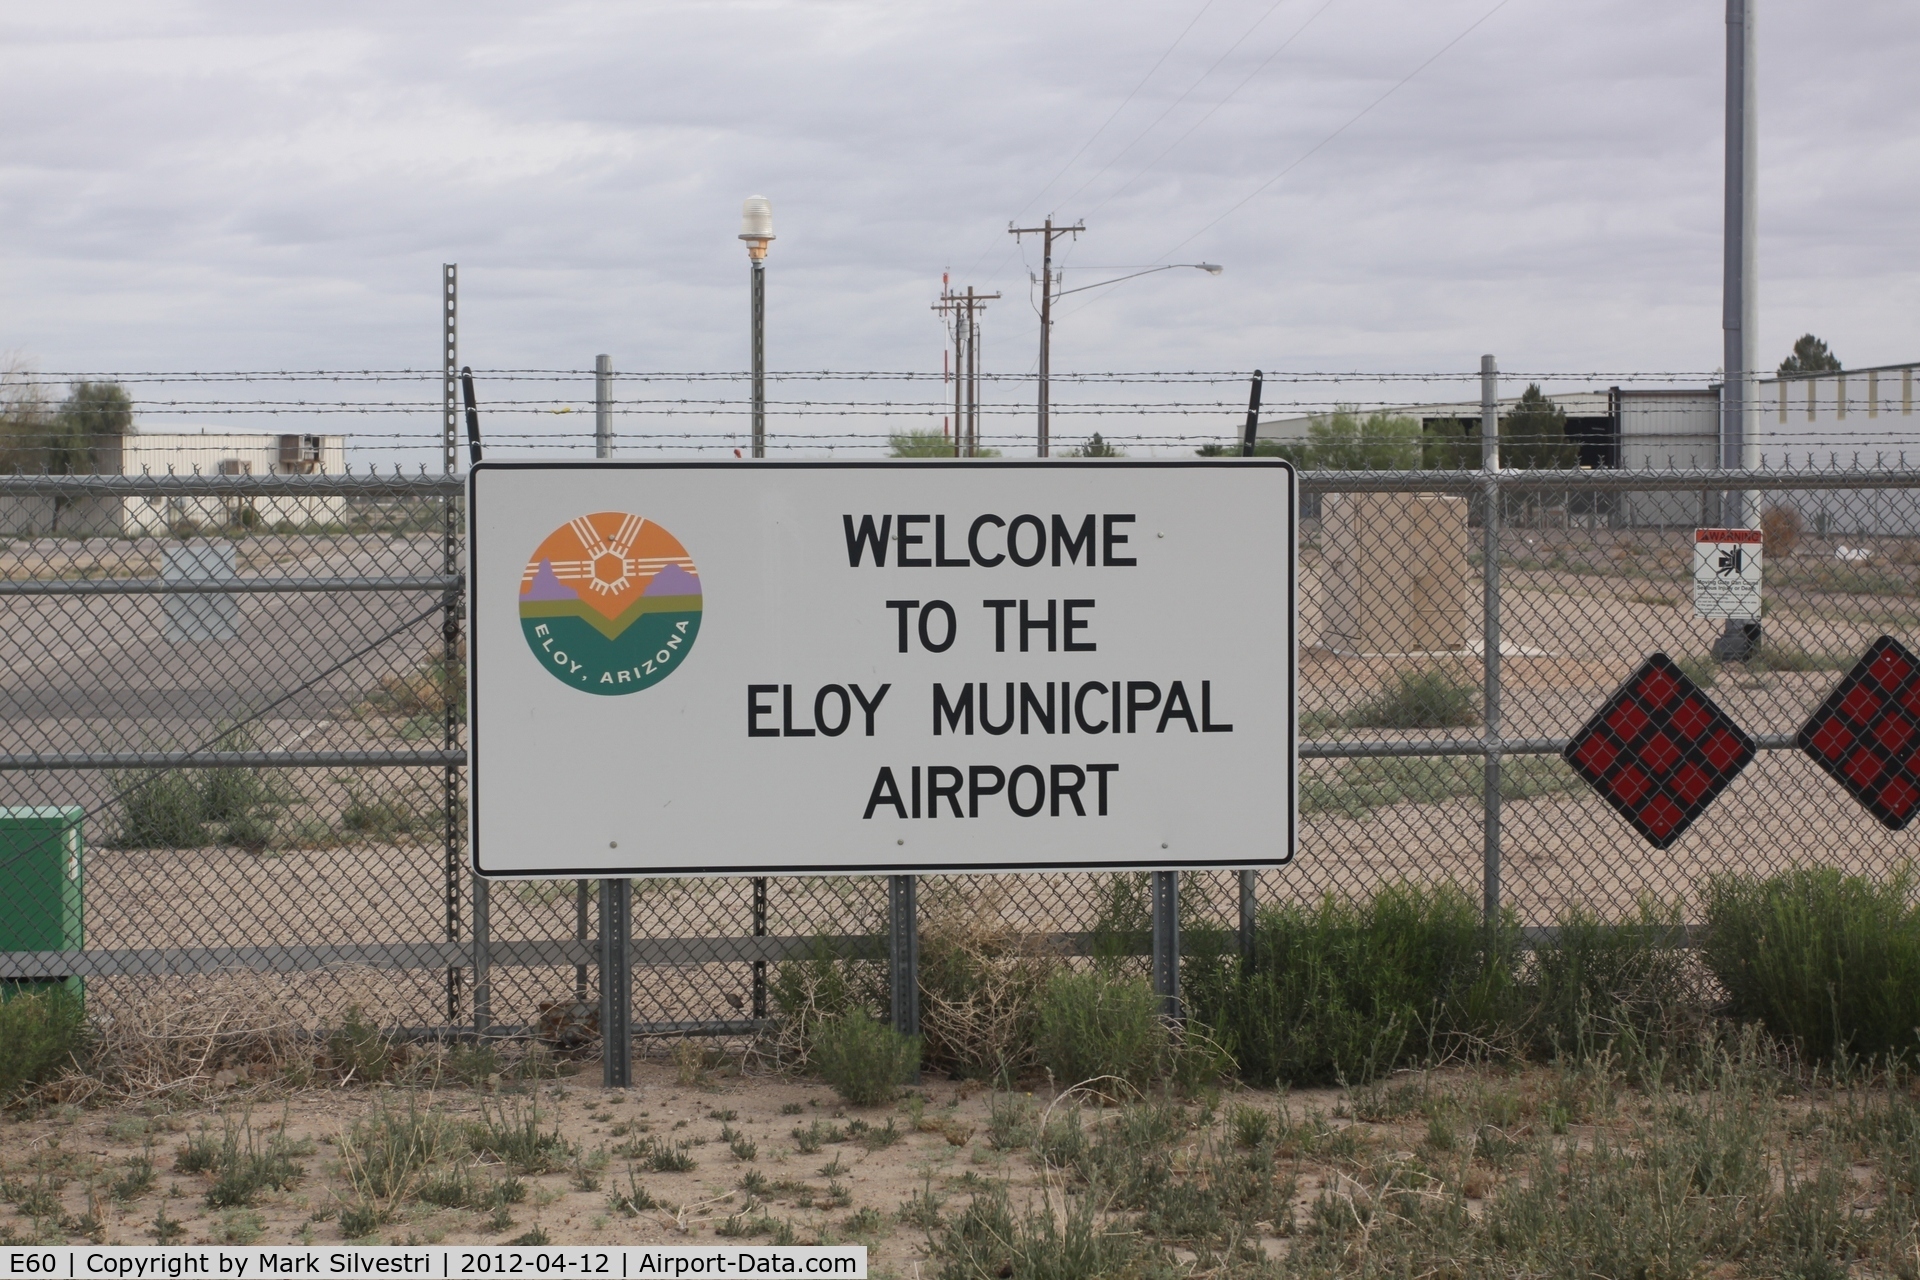 Eloy Municipal Airport (E60) - Welcome sign for Eloy Municipal